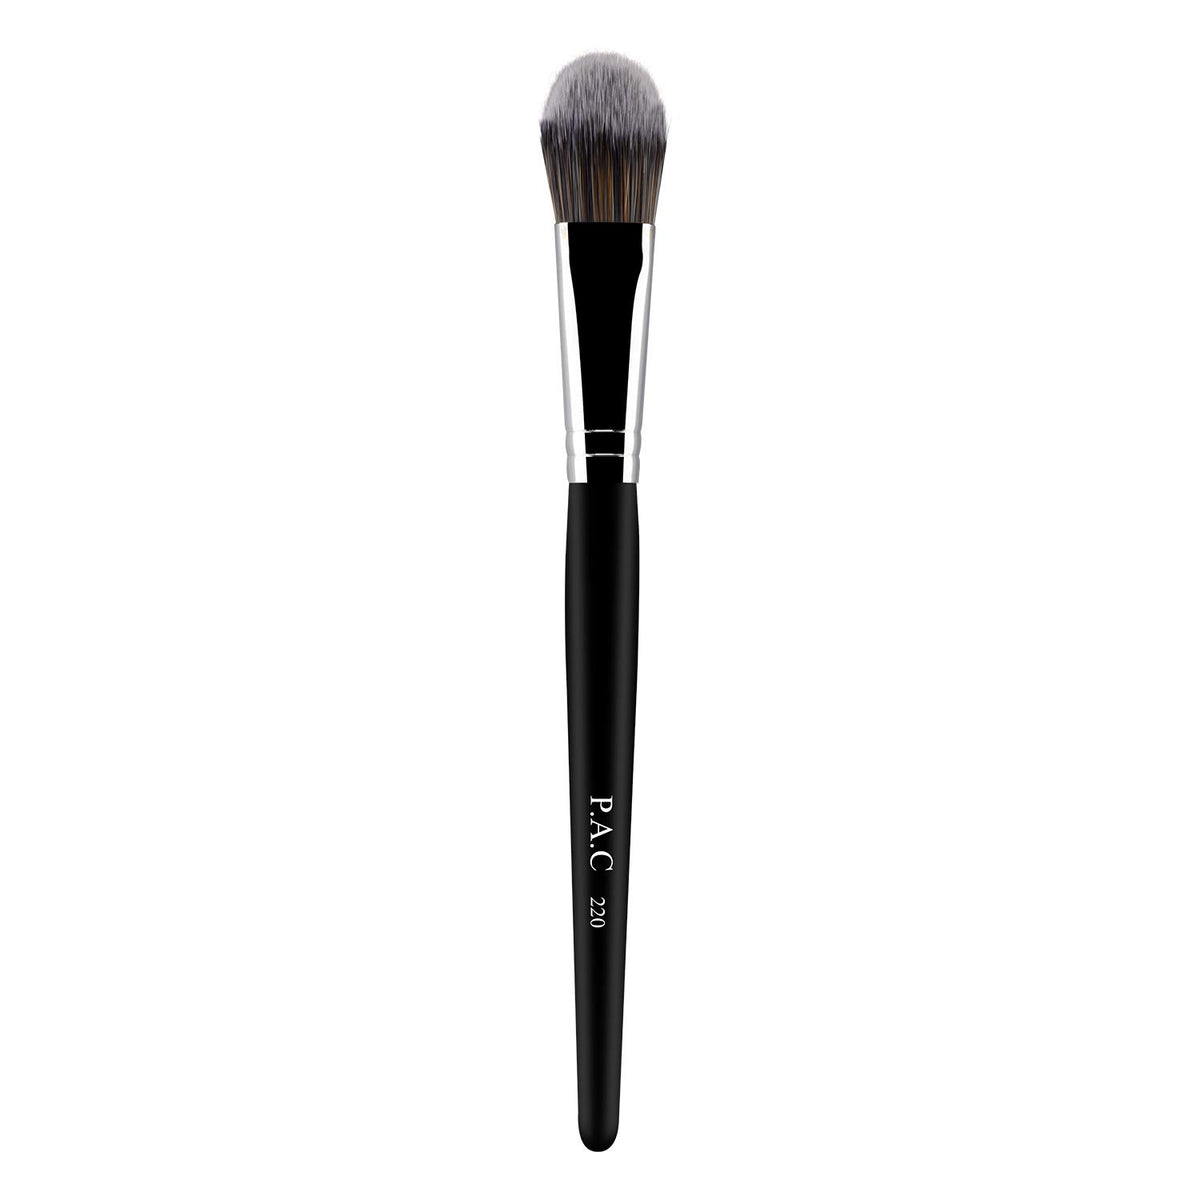 PAC Concealer Brush 220 PAC